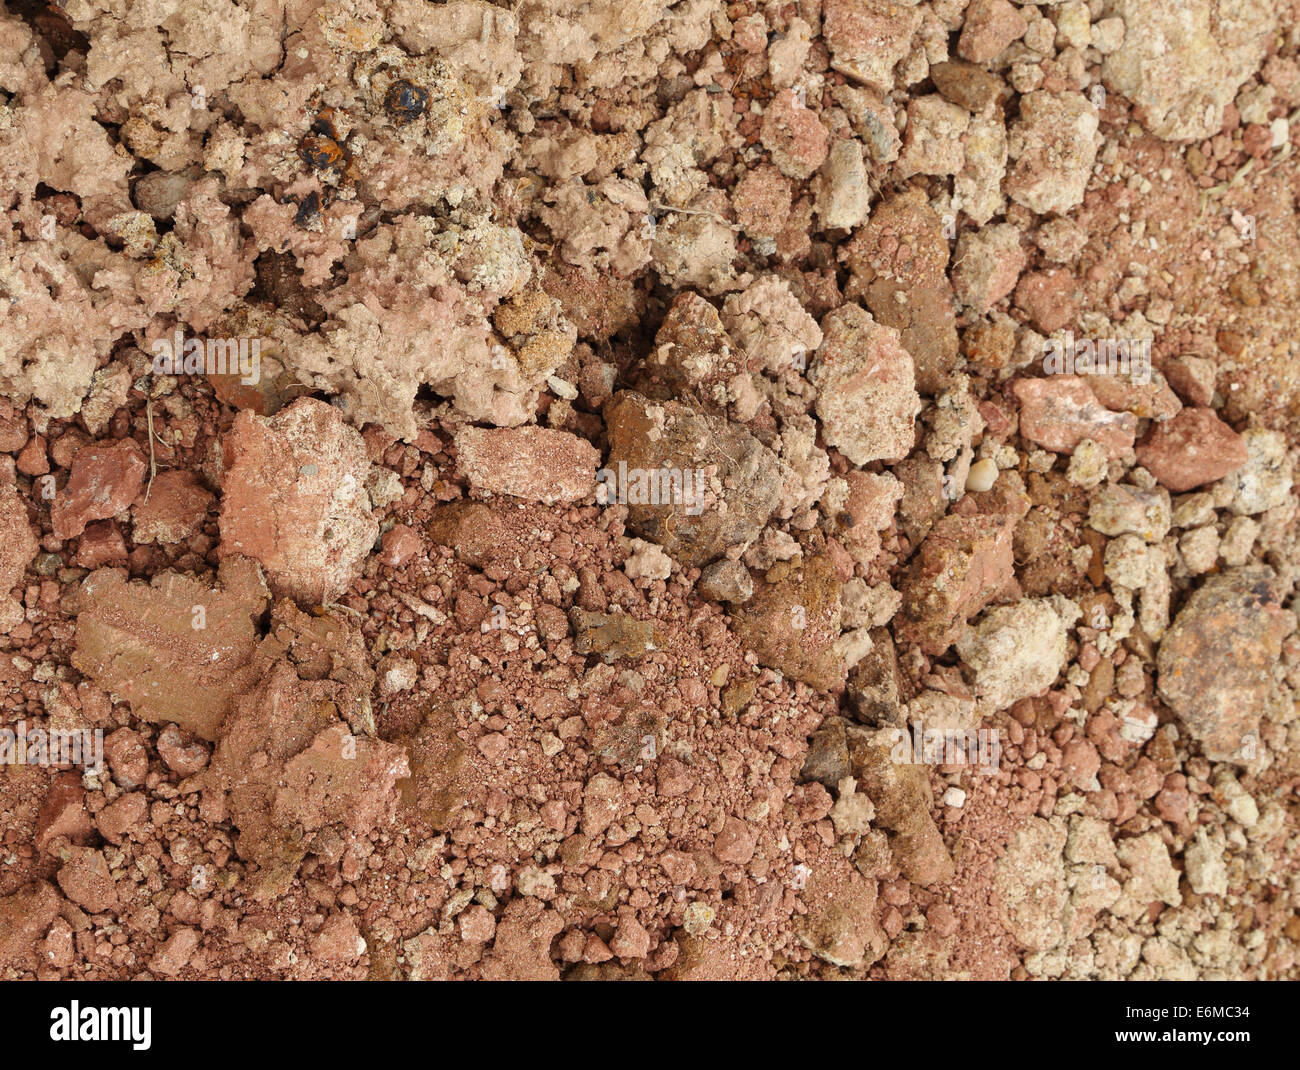 Texture of dry red clay with stones Stock Photo